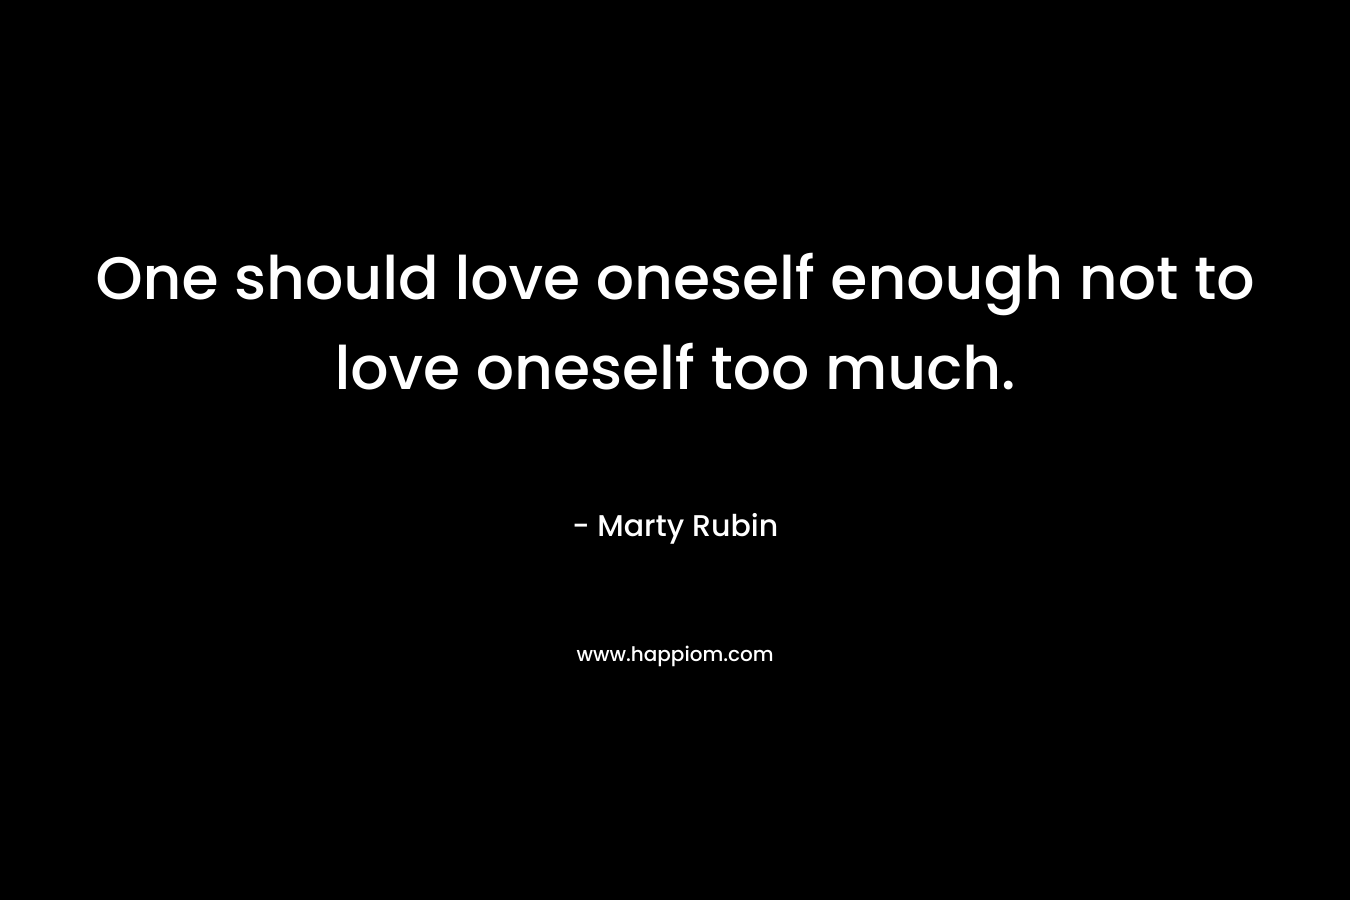 One should love oneself enough not to love oneself too much.